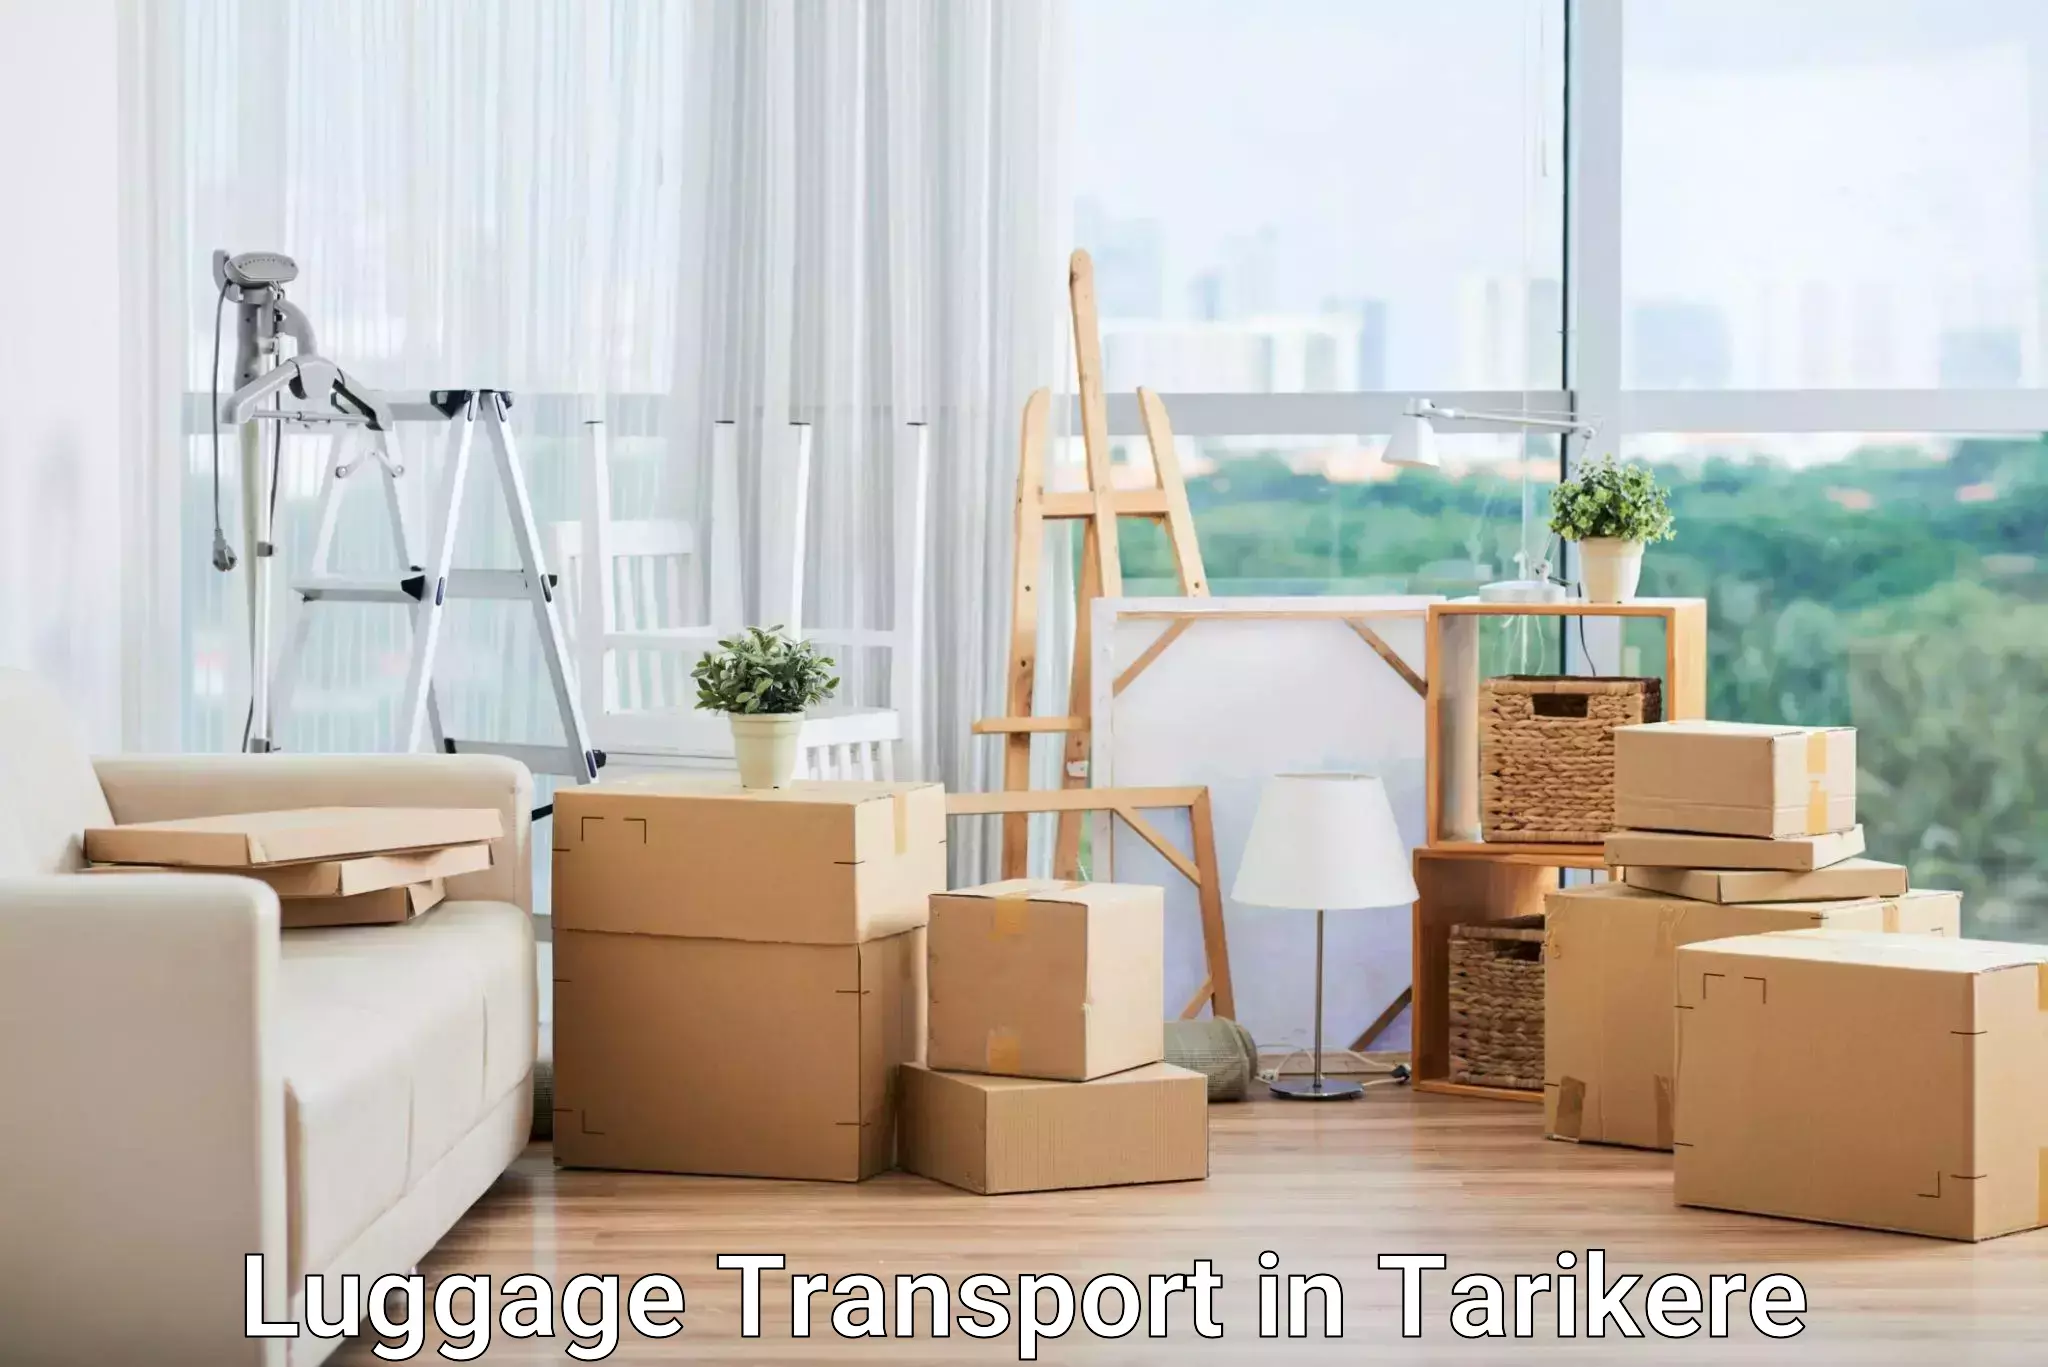 Group luggage shipping in Tarikere